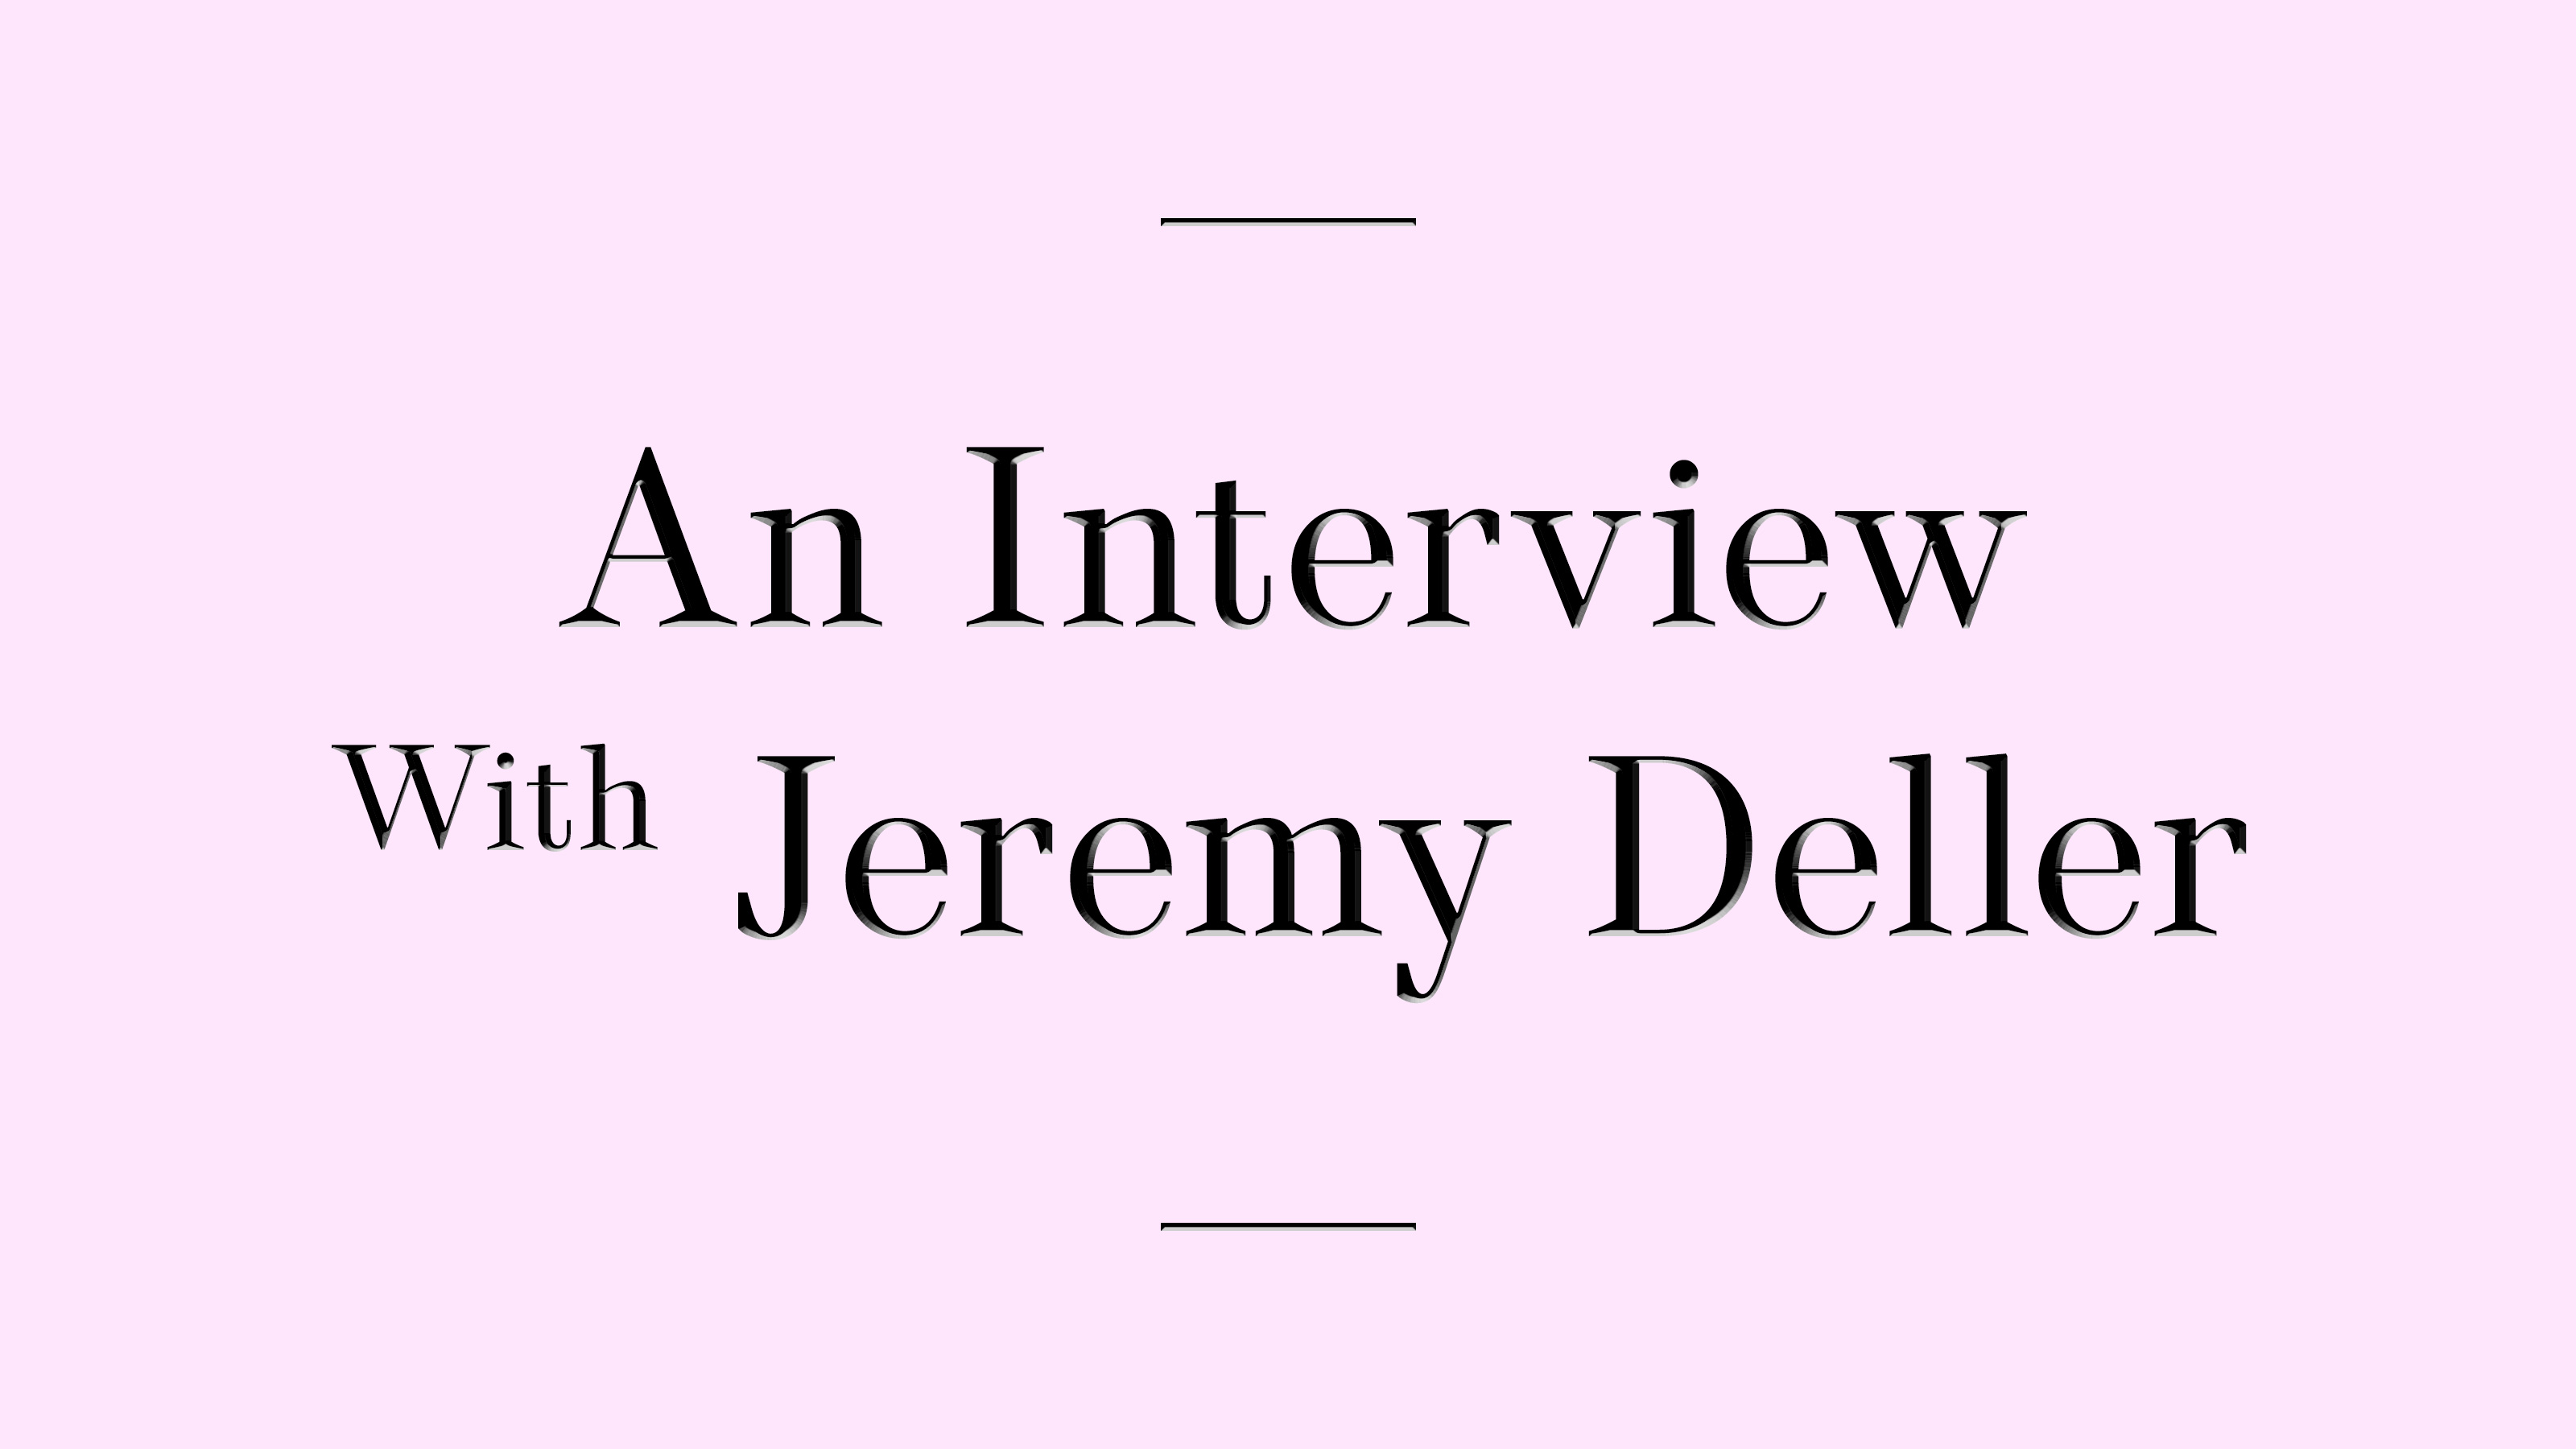 An Interview With Jeremy Deller